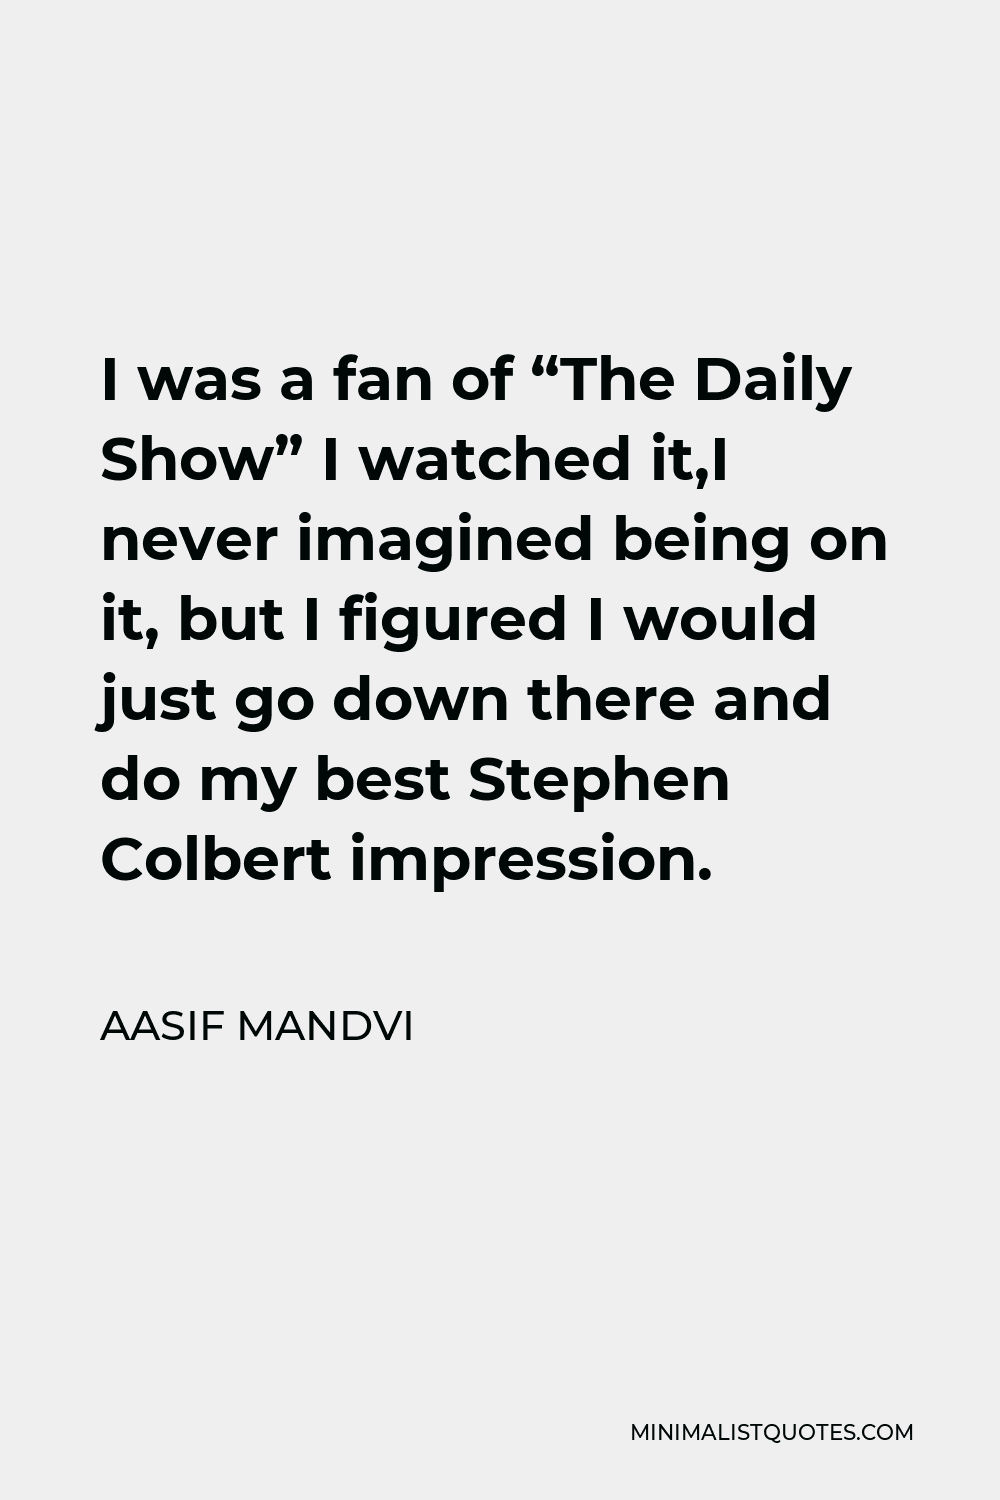 Aasif Mandvi Quote - I was a fan of “The Daily Show” I watched it,I never imagined being on it, but I figured I would just go down there and do my best Stephen Colbert impression.